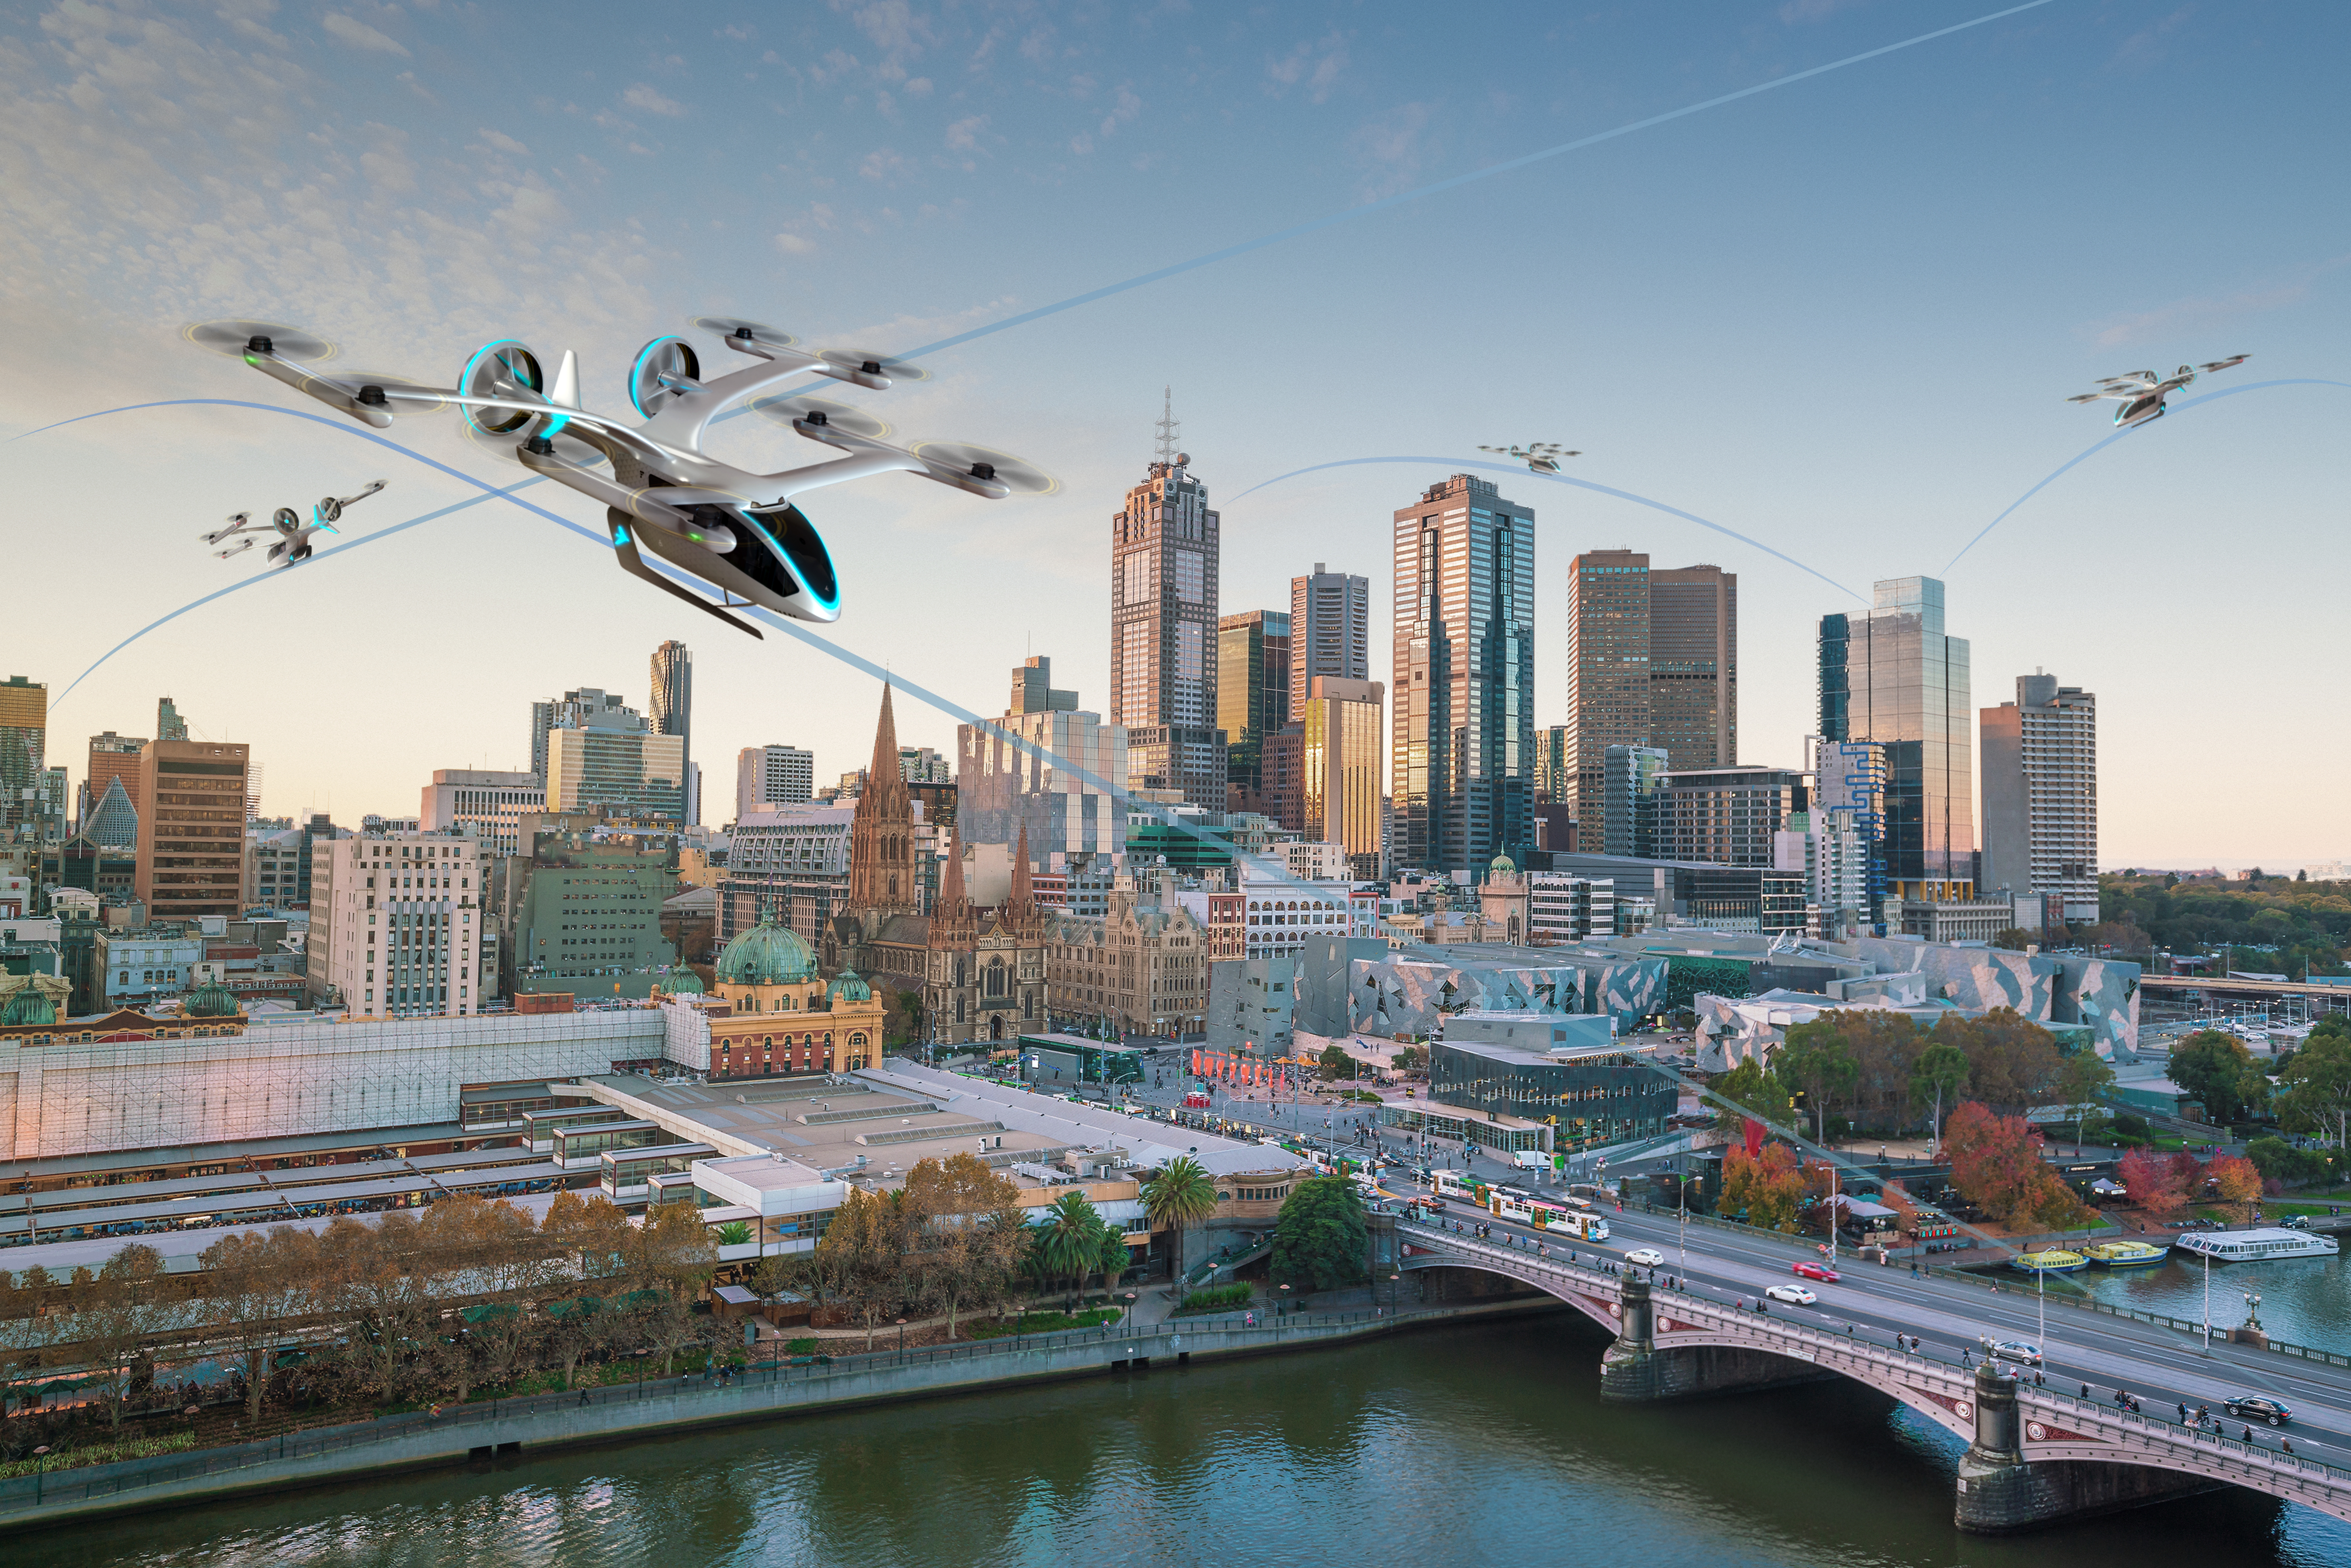 EmbraerX and Airservices Australia release concept for urban air mobility